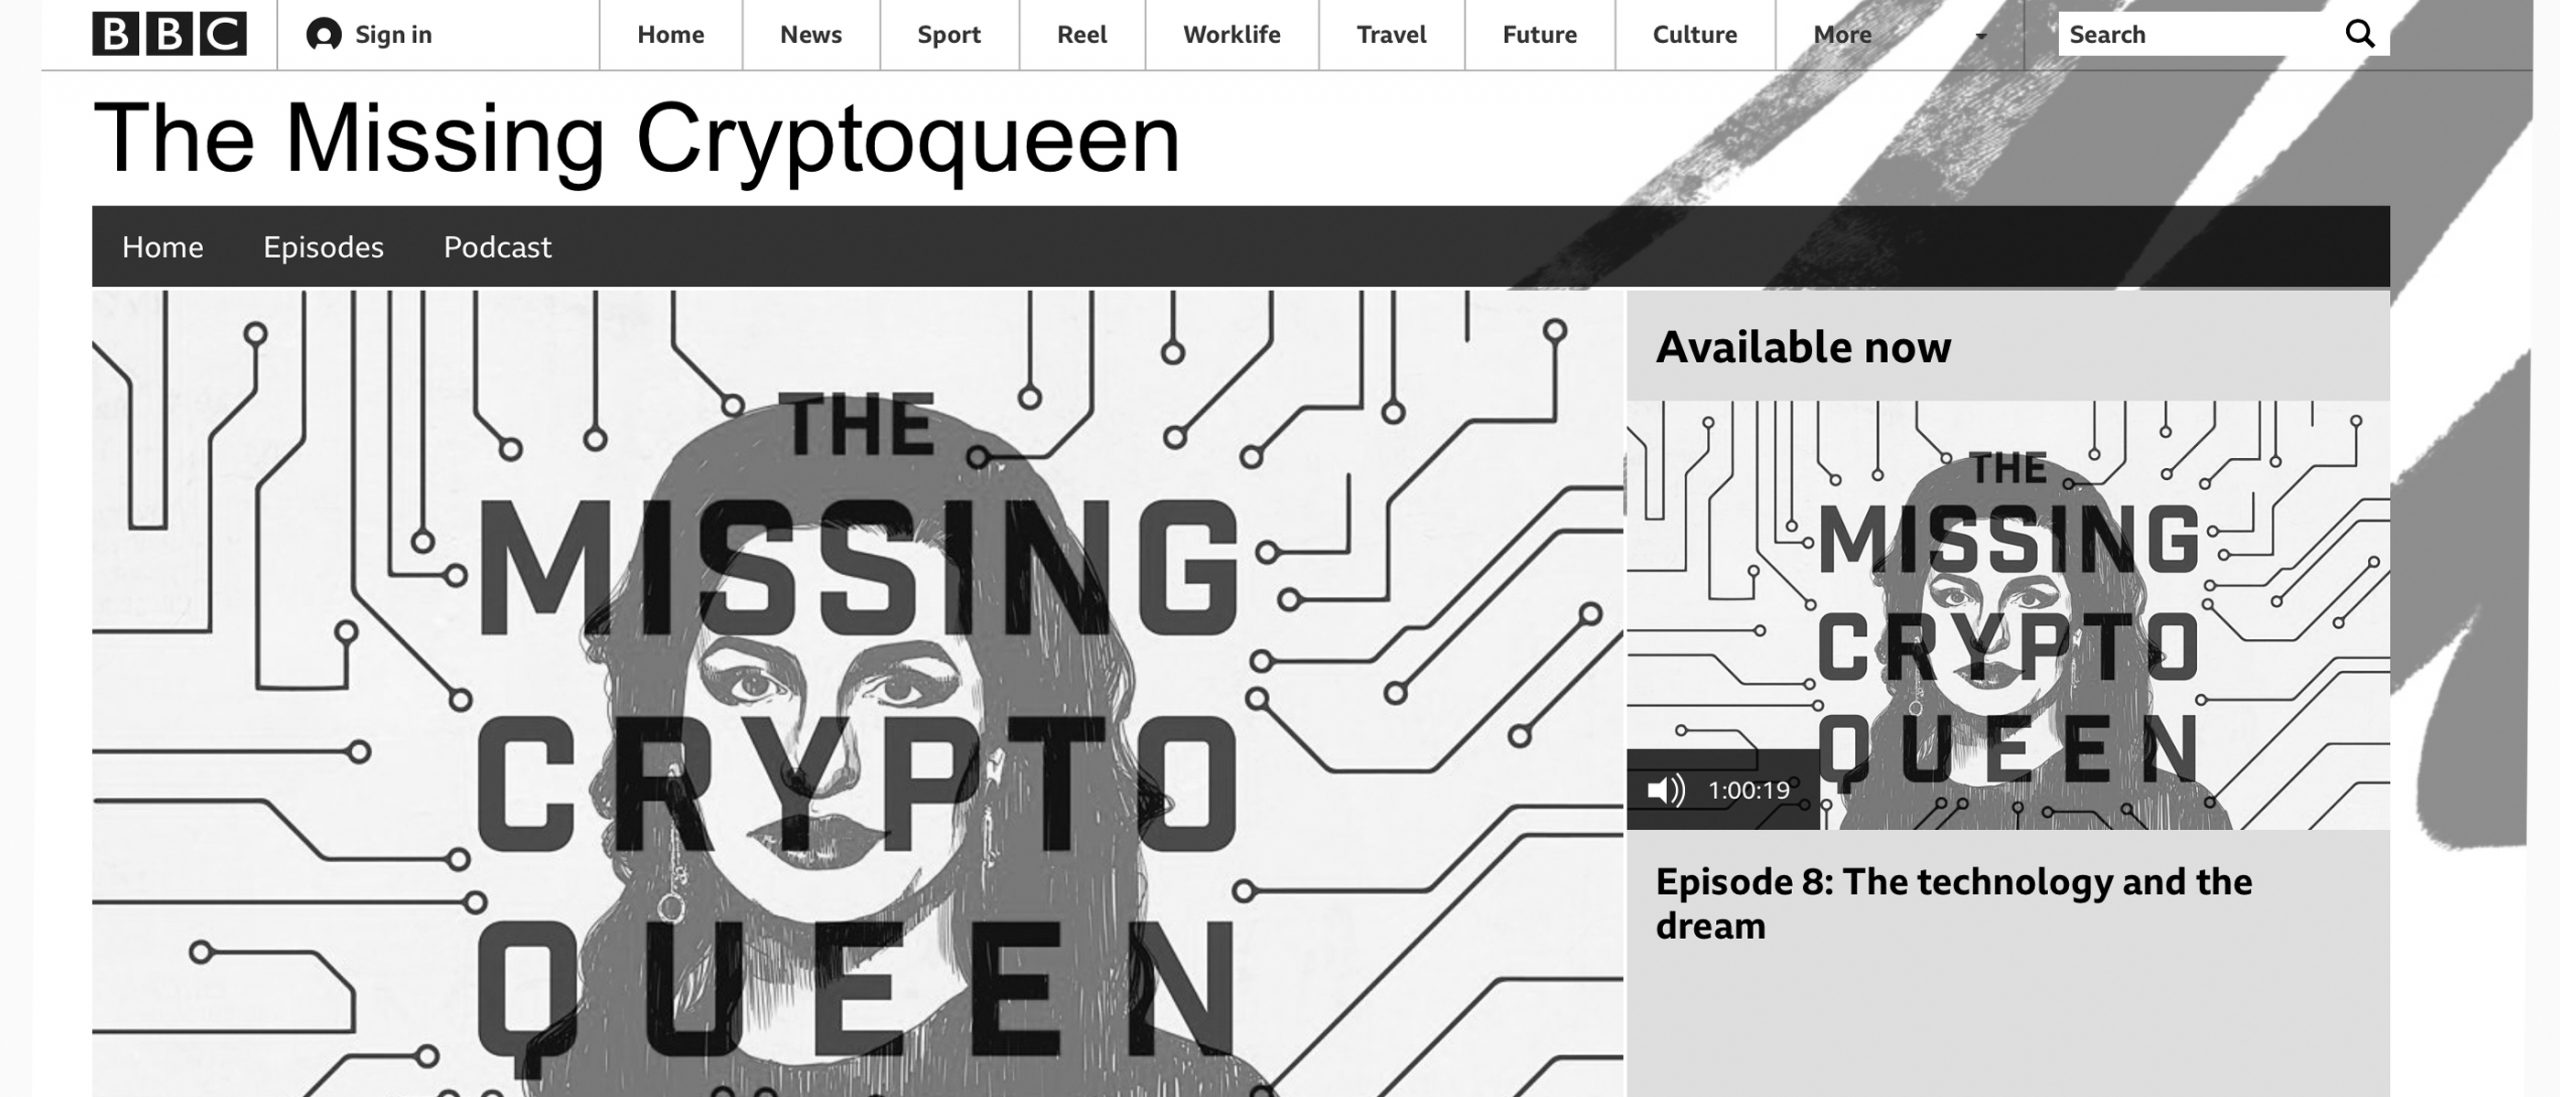 New Regency Television Wins Screen Rights to Onecoin Story - The Missing Cryptoqueen